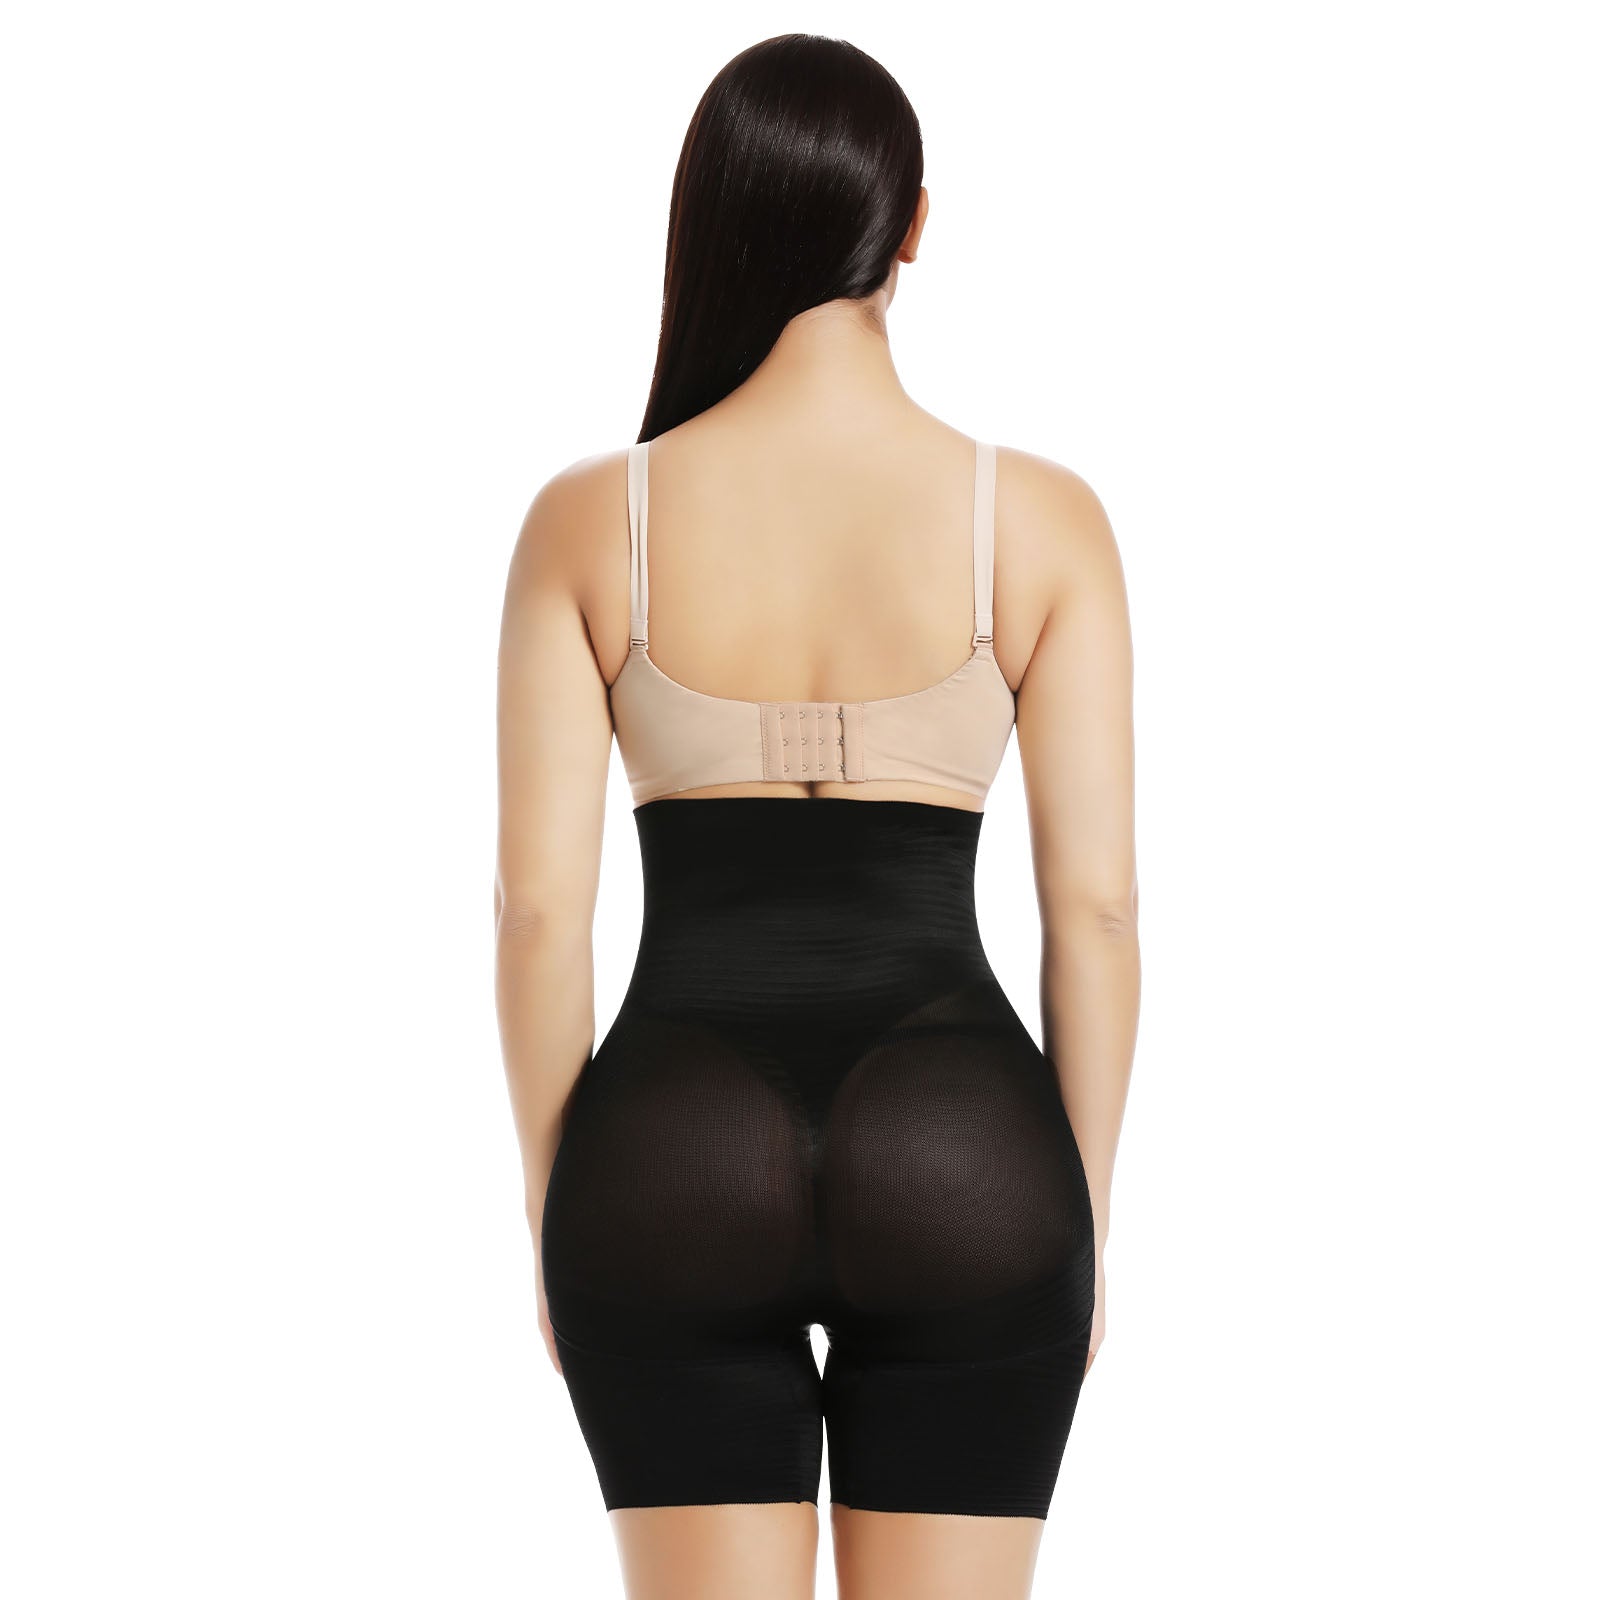 Shaperin High Waisted Shaper Panty for Women